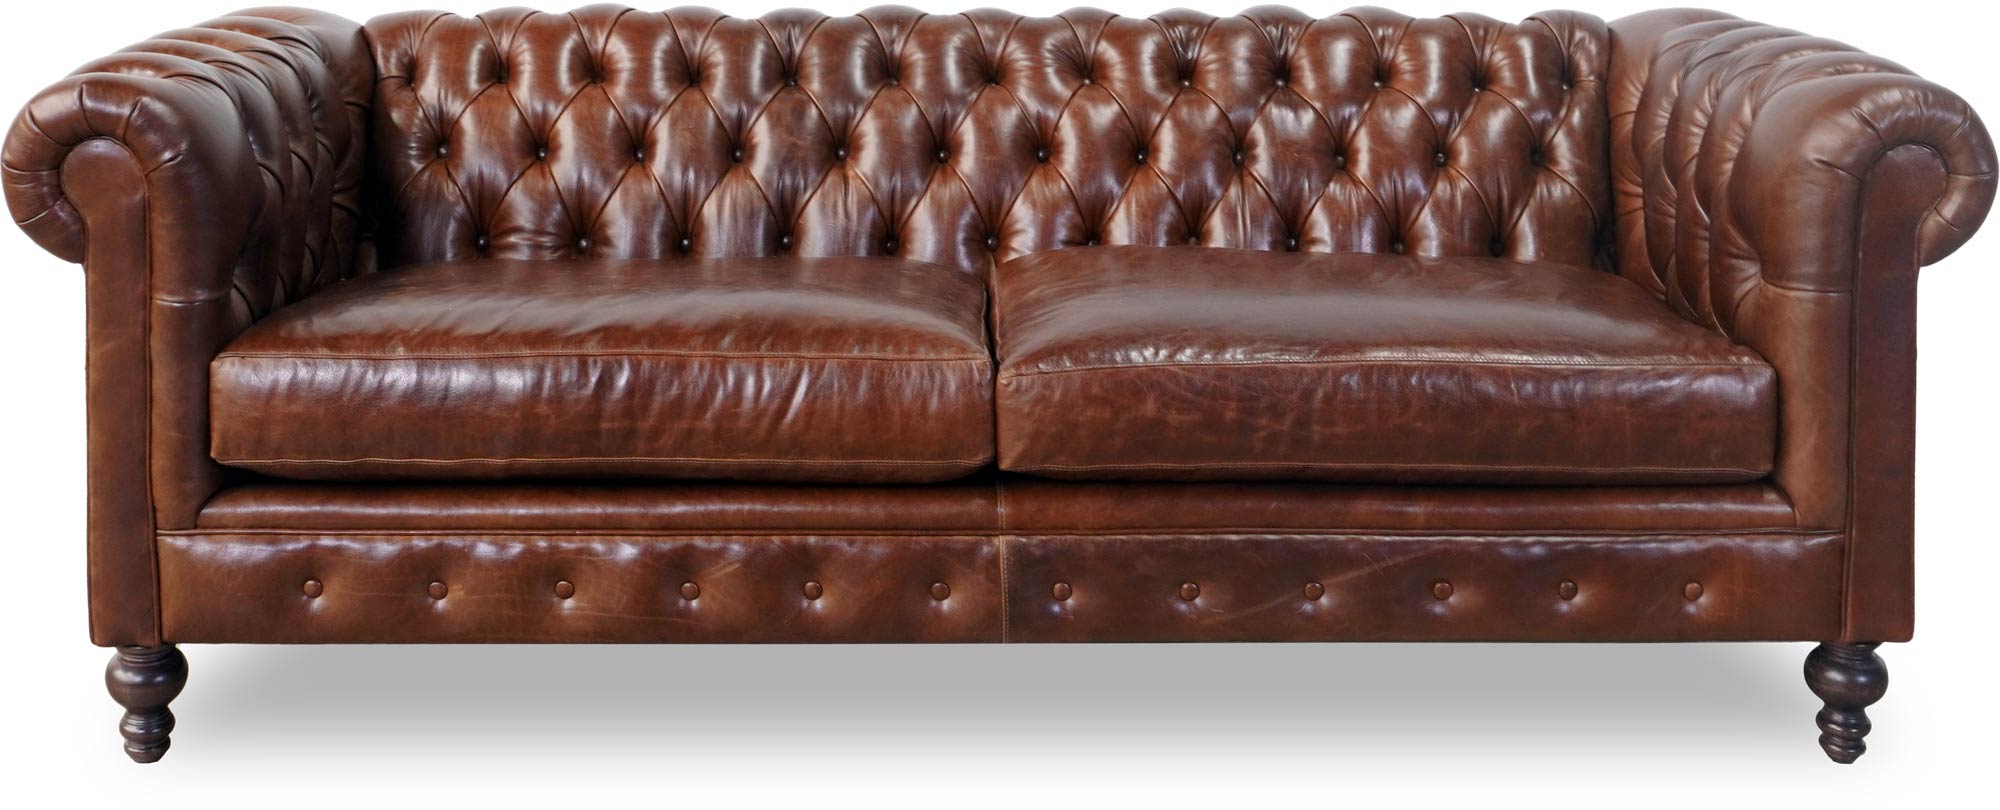 85 Boo petite Chesterfield sofa in Mont Blanc Bourbon leather